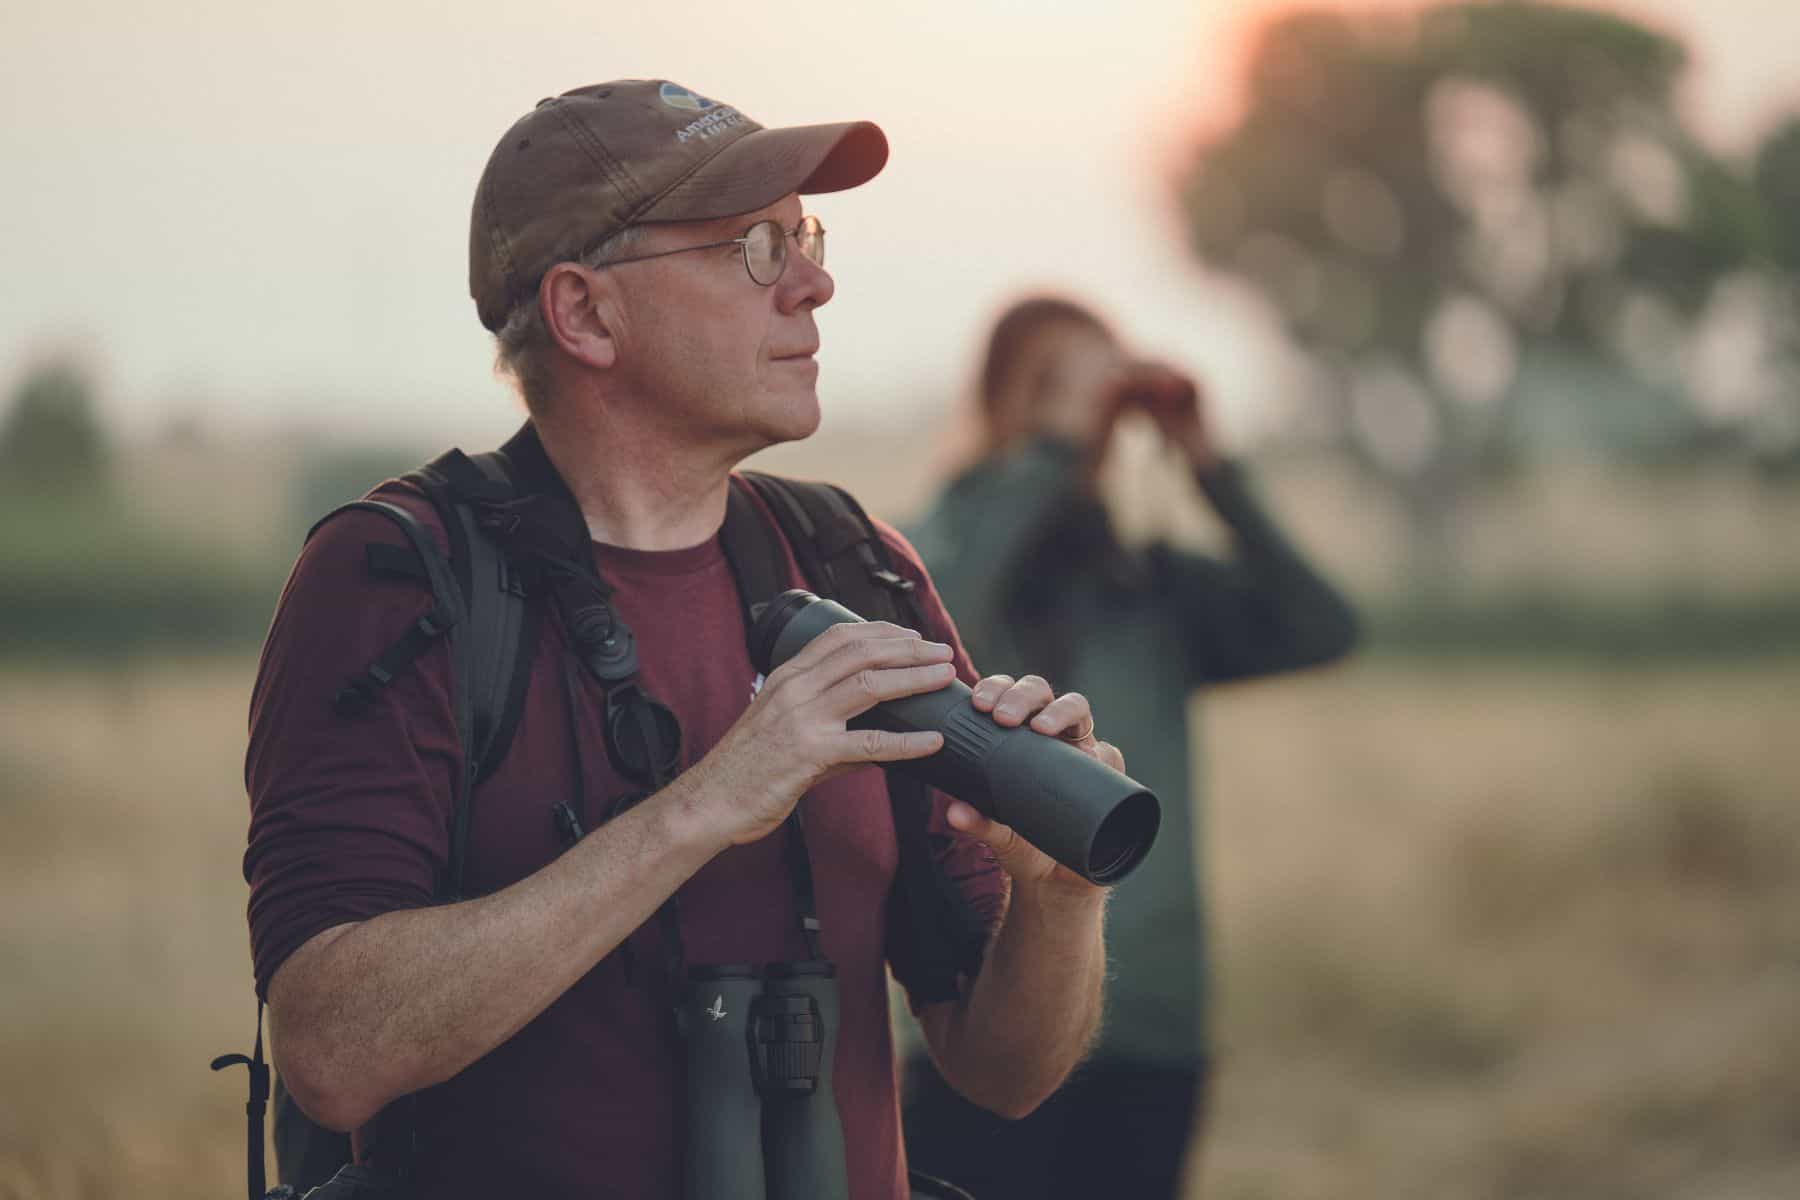 A man holding a scope among nature